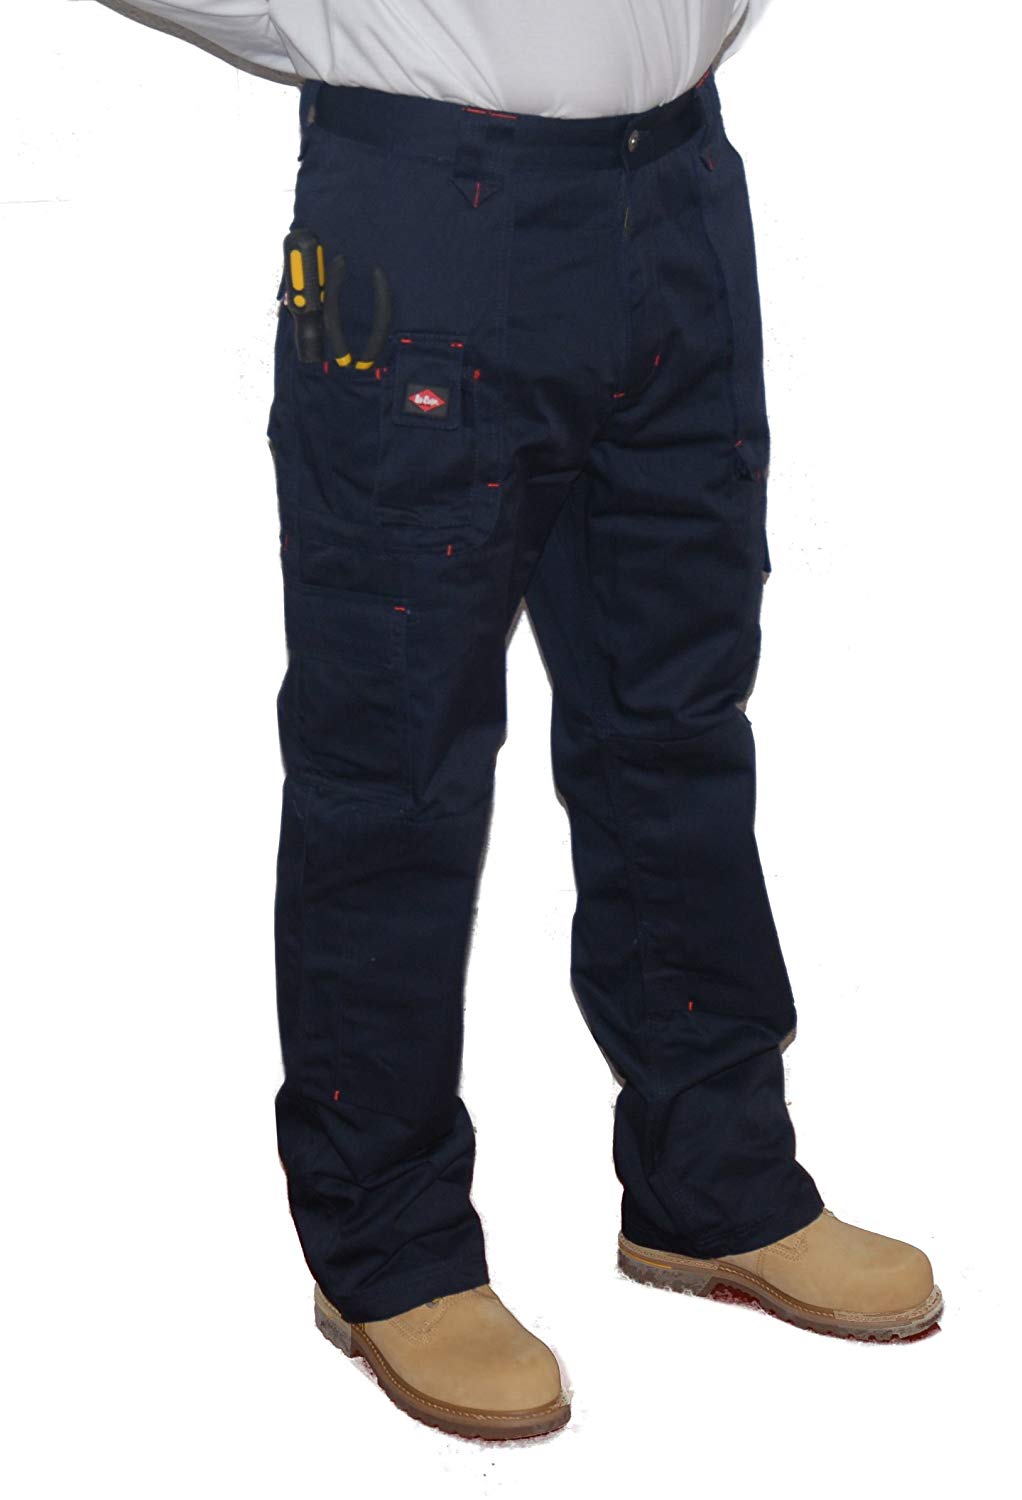 Size 30W/33L Lee Cooper Workwear Mens Multi Pocket Easy Care Heavy Duty Knee Pad Pockets Safety Work Cargo Trousers Pants Long Navy